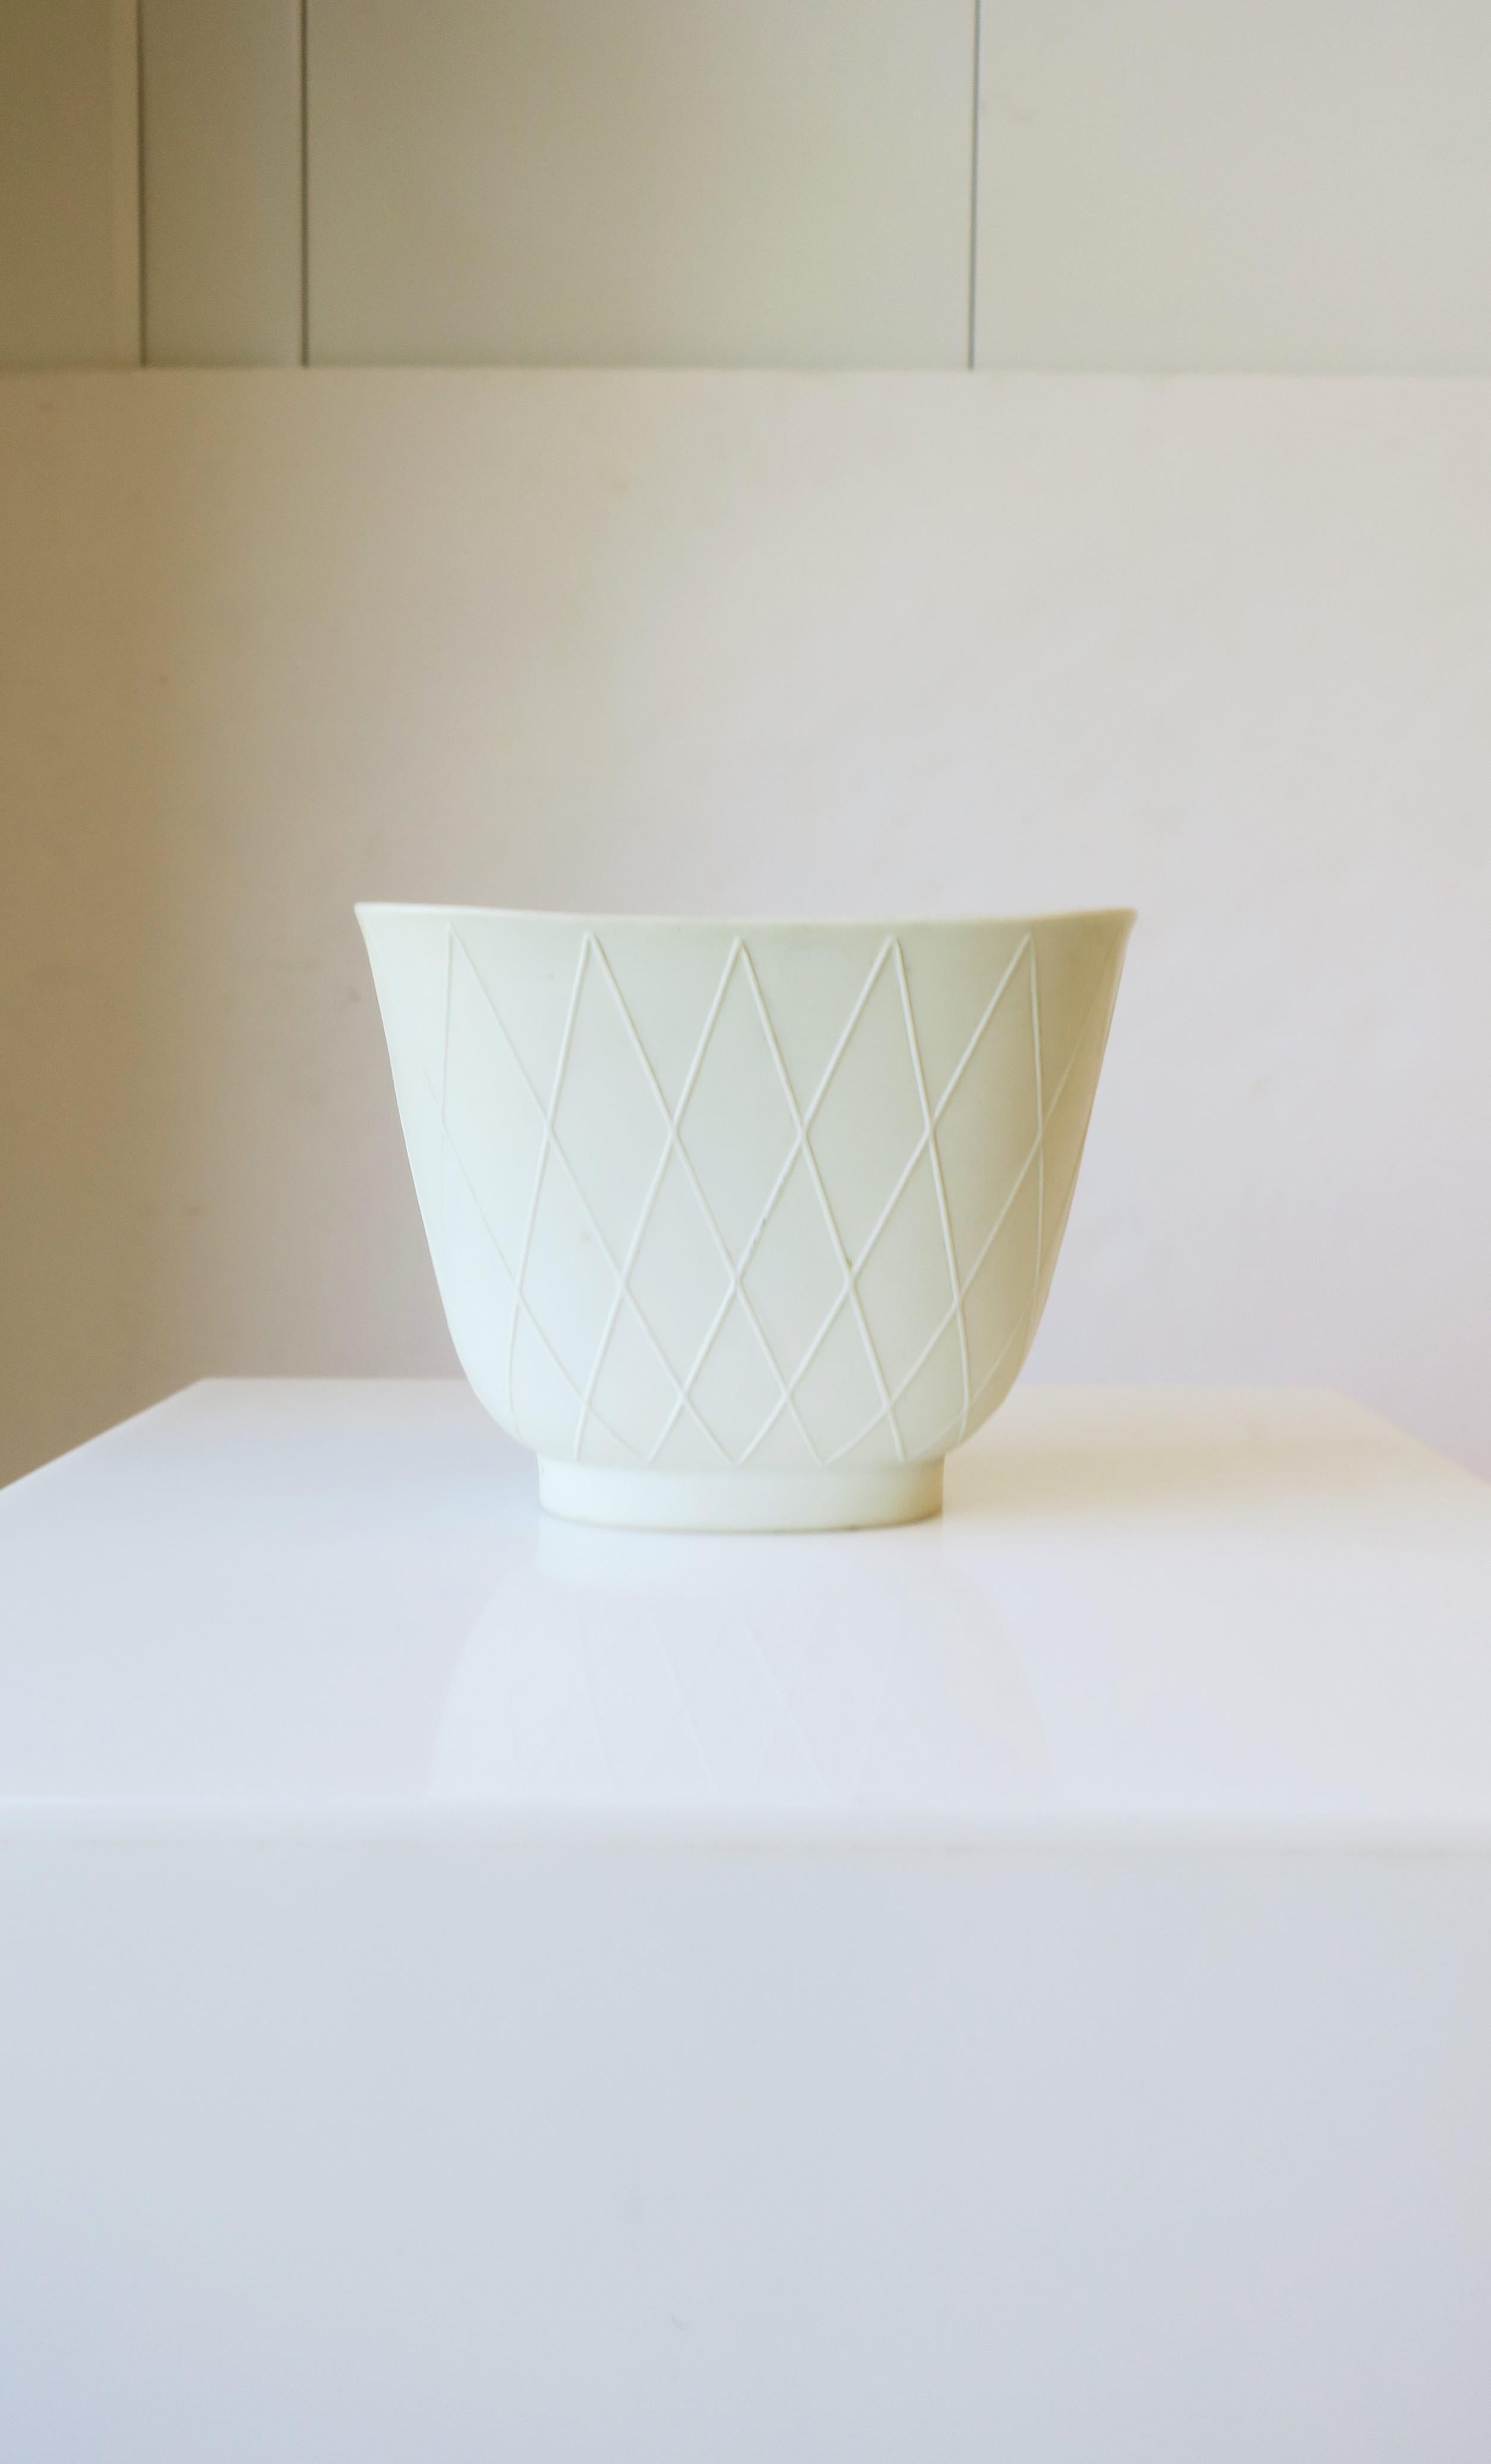 A beautiful white to stone-white German porcelain oblong vase by Rosenthal, circa early-20th century, Germany. A matte exterior with a beautiful raised harlequin pattern. Glazed interior. Marking's on underside as shown in image #17. Dimensions: